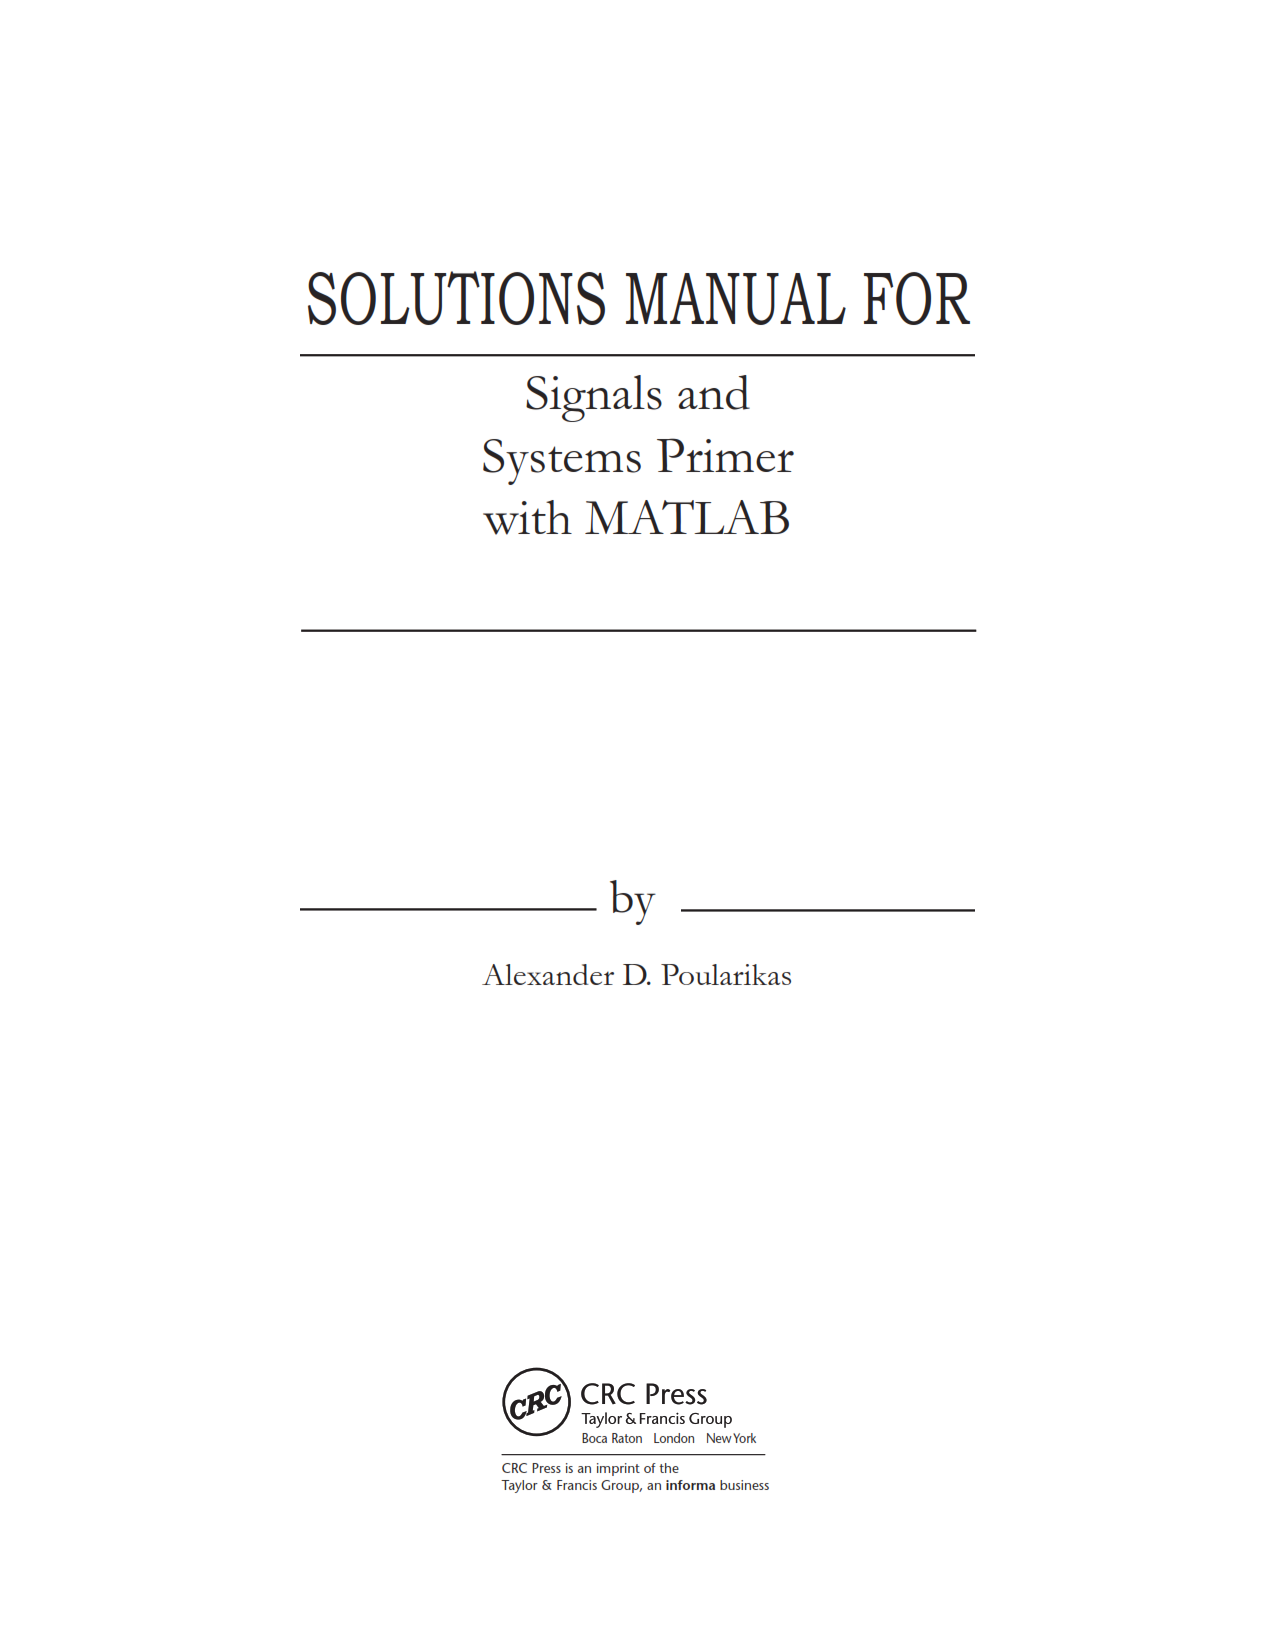 Download free signal and system primer with matlab by Alexander D. Poularikas solution manual pdf | gioumeh solutions